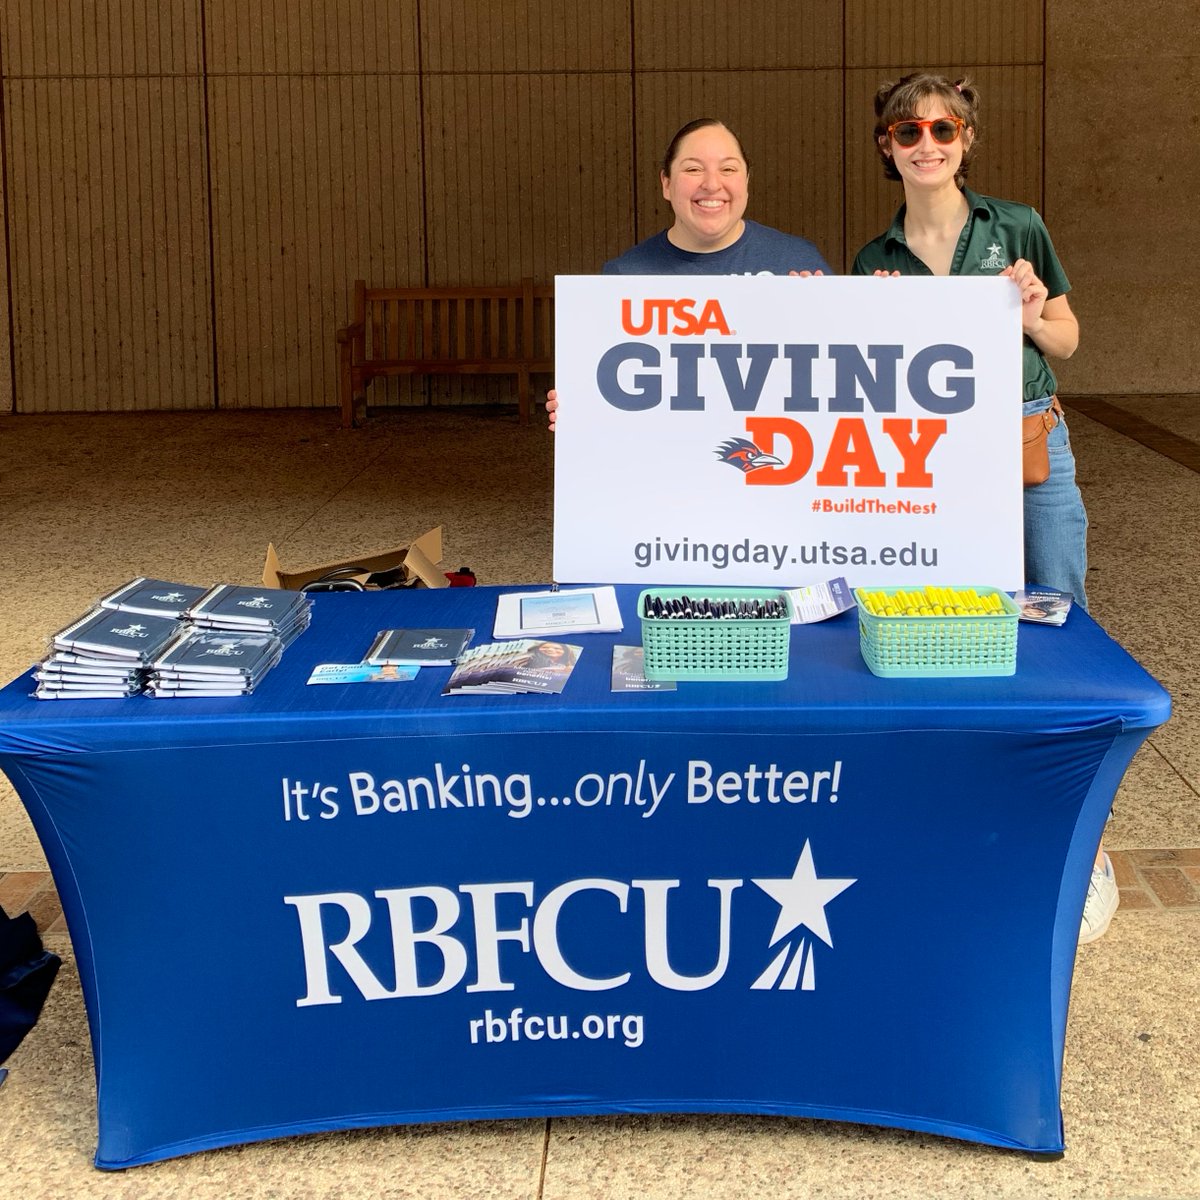 RBFCU recently lent a helping hand to #BuildTheNest for @UTSA's third annual Giving Day! Our donation went towards their Magnet Challenge, which magnets could be redeemed for an on-campus student organization or a program of choice! #RBFCU #UTSAGivingDay #UTSA